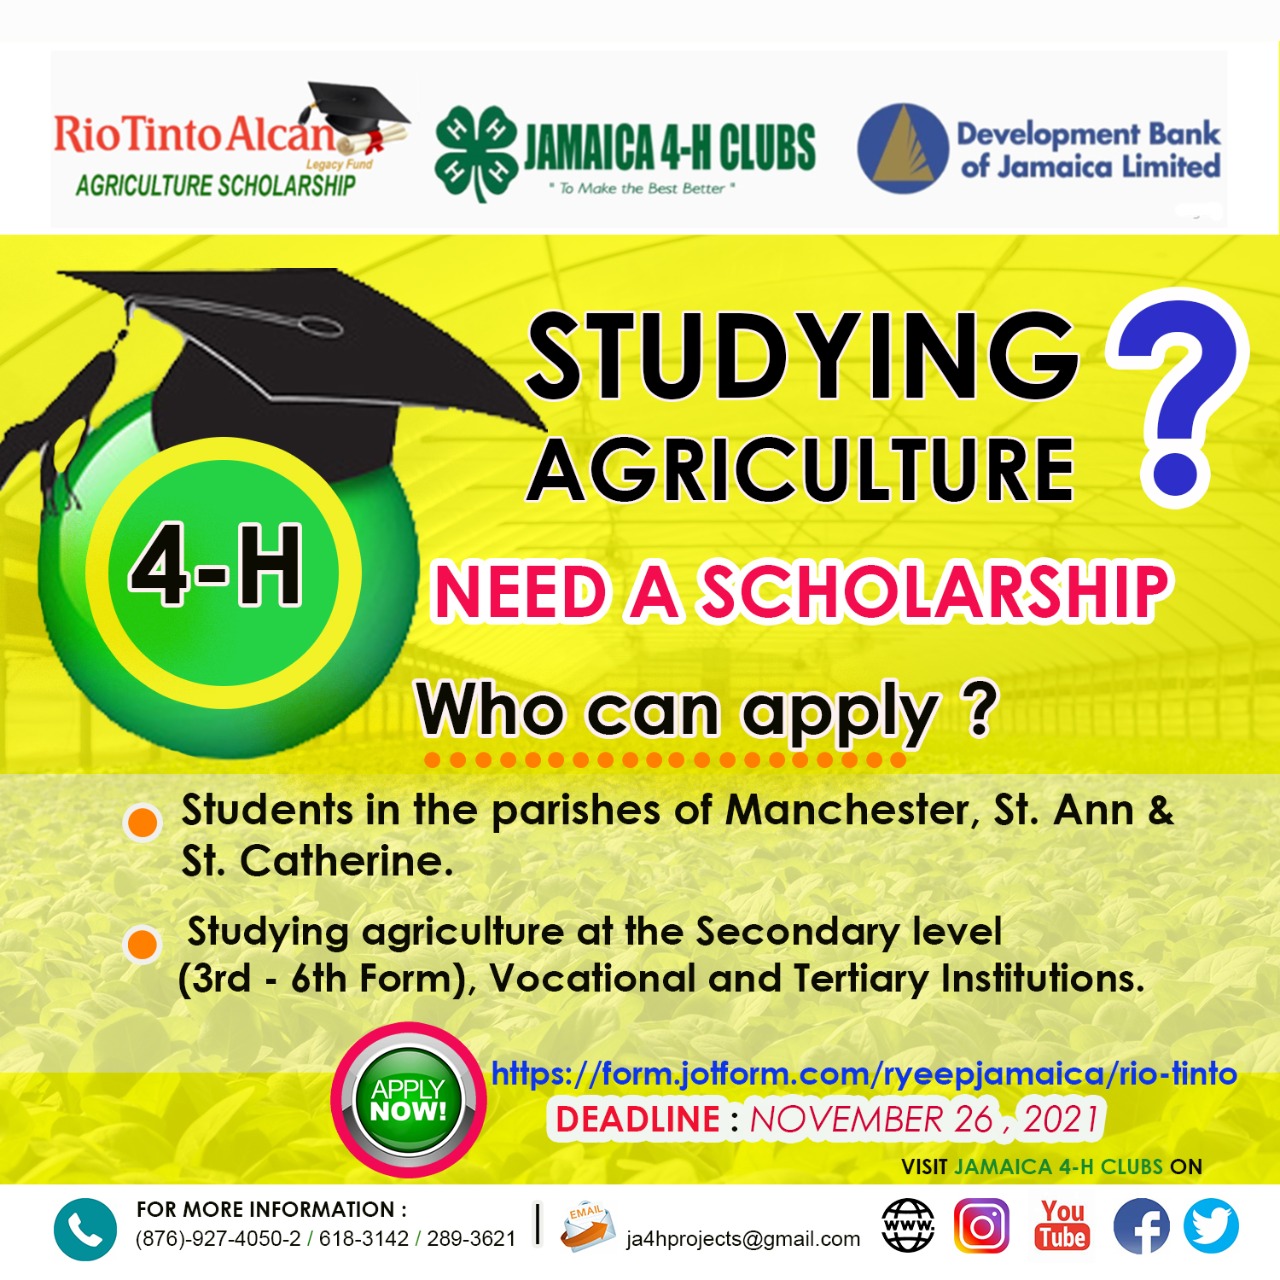 AGRICULTURE SCHOLARSHIPS AVAILABLE.